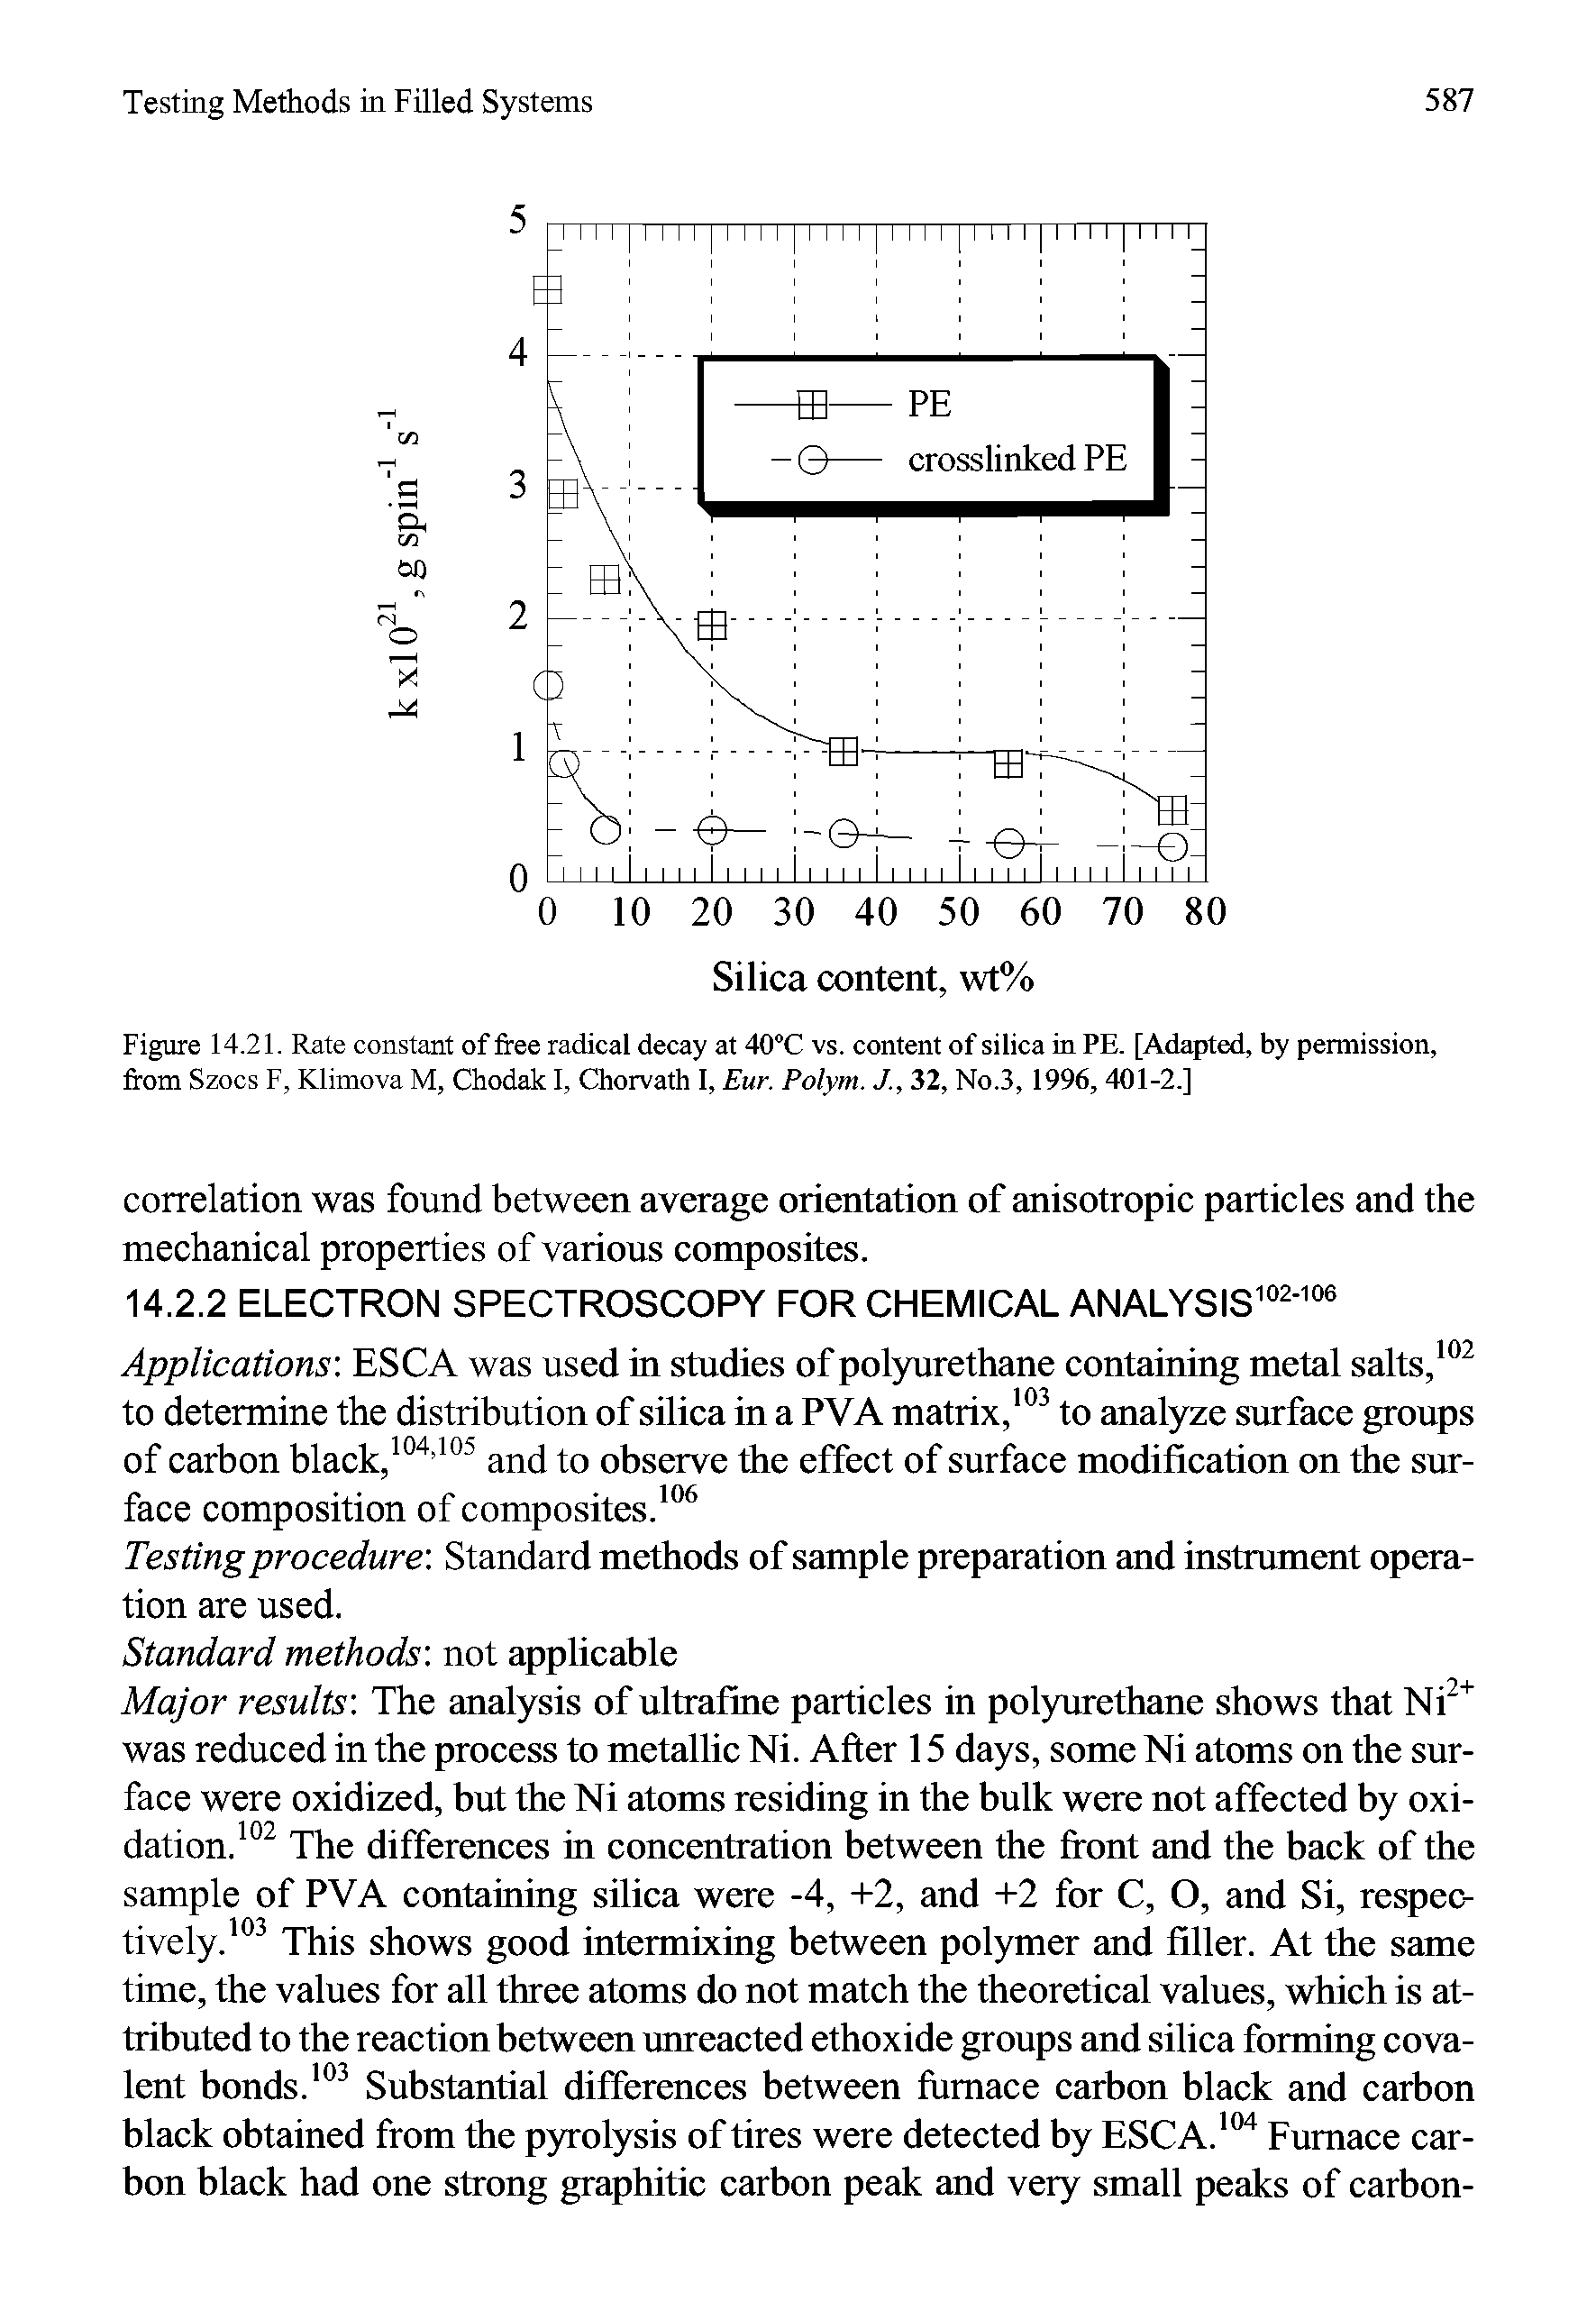 Figure 14.21. Rate constant of free radical decay at 40"C vs. content of silica in PE. [Adapted, by permission, from Szocs F, Klimova M, Chodak I, Chorvath 1, Eur. Polym. J., 32, No.3, 1996, 401-2.]...